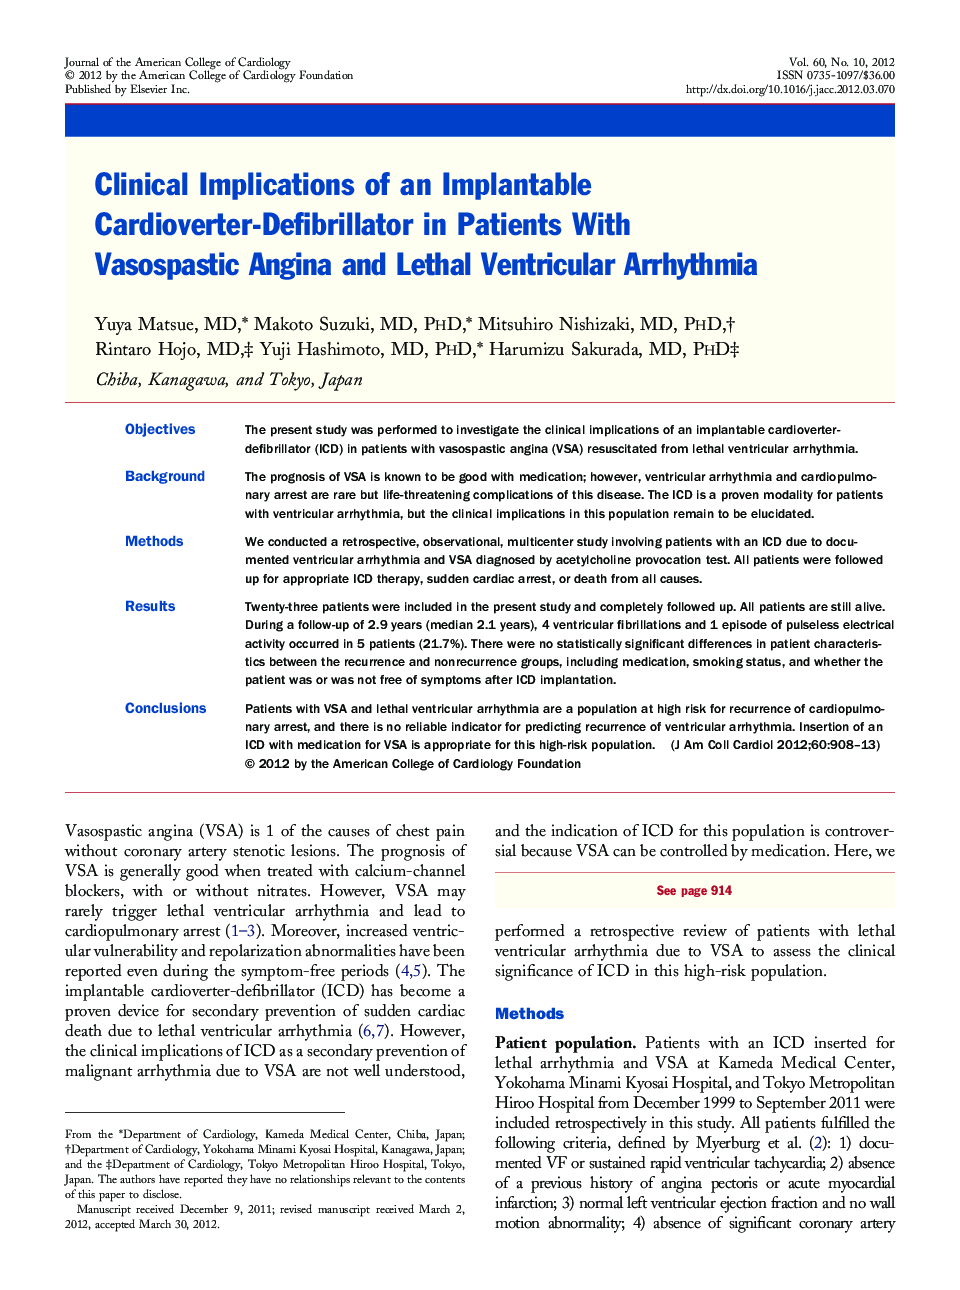 Clinical Implications of an Implantable Cardioverter-Defibrillator in Patients With Vasospastic Angina and Lethal Ventricular Arrhythmia 